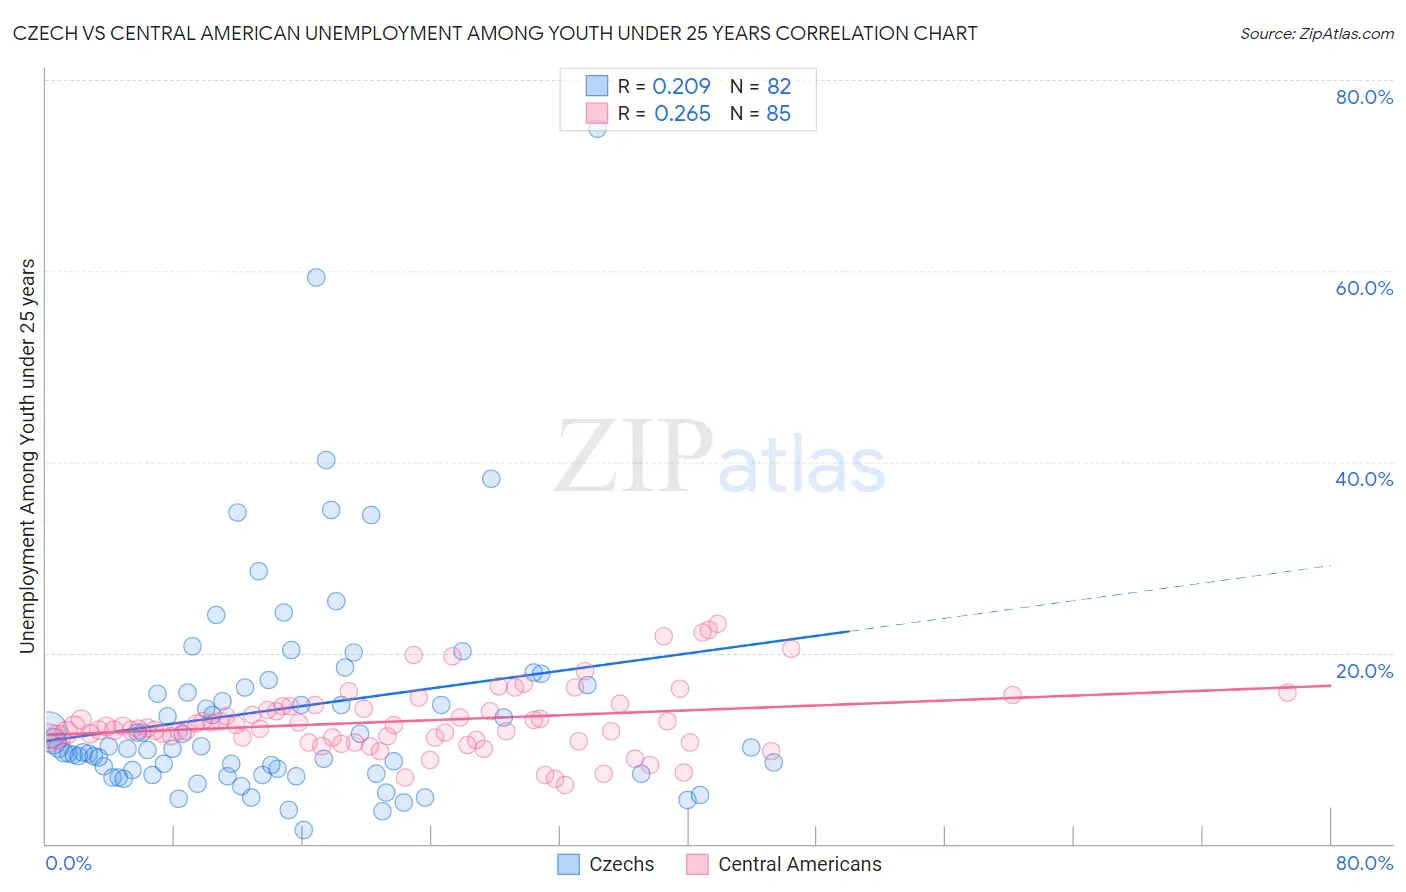 Czech vs Central American Unemployment Among Youth under 25 years